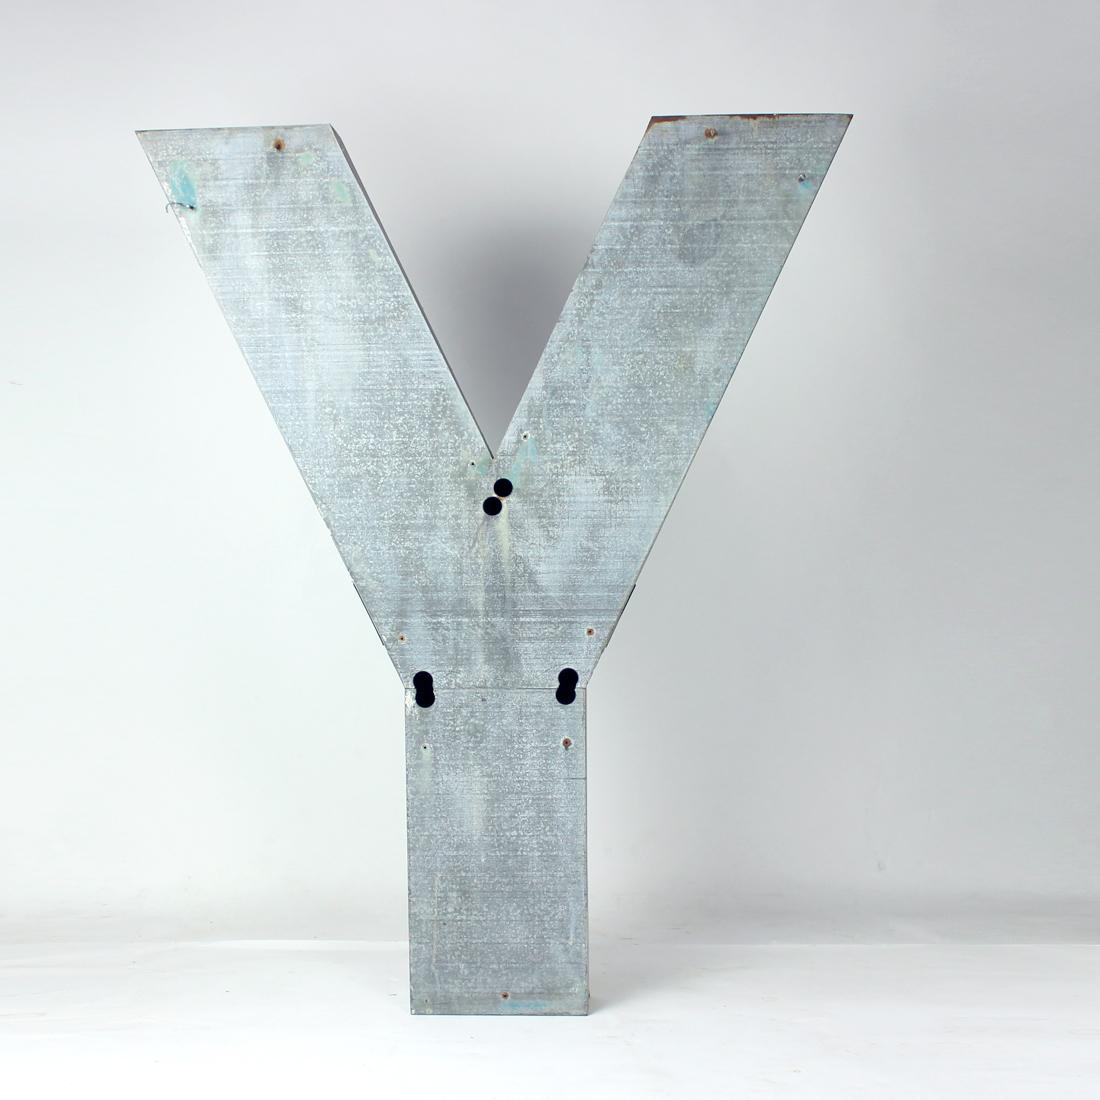 Amazing piece of vintage wall art. An industrial letter made of zinc sheet. Original sign used until recently in a factory in Czechoslovakia. Produced in 1950s. The letter is huge, 142cm high. It is definitely a statement whereever this piece